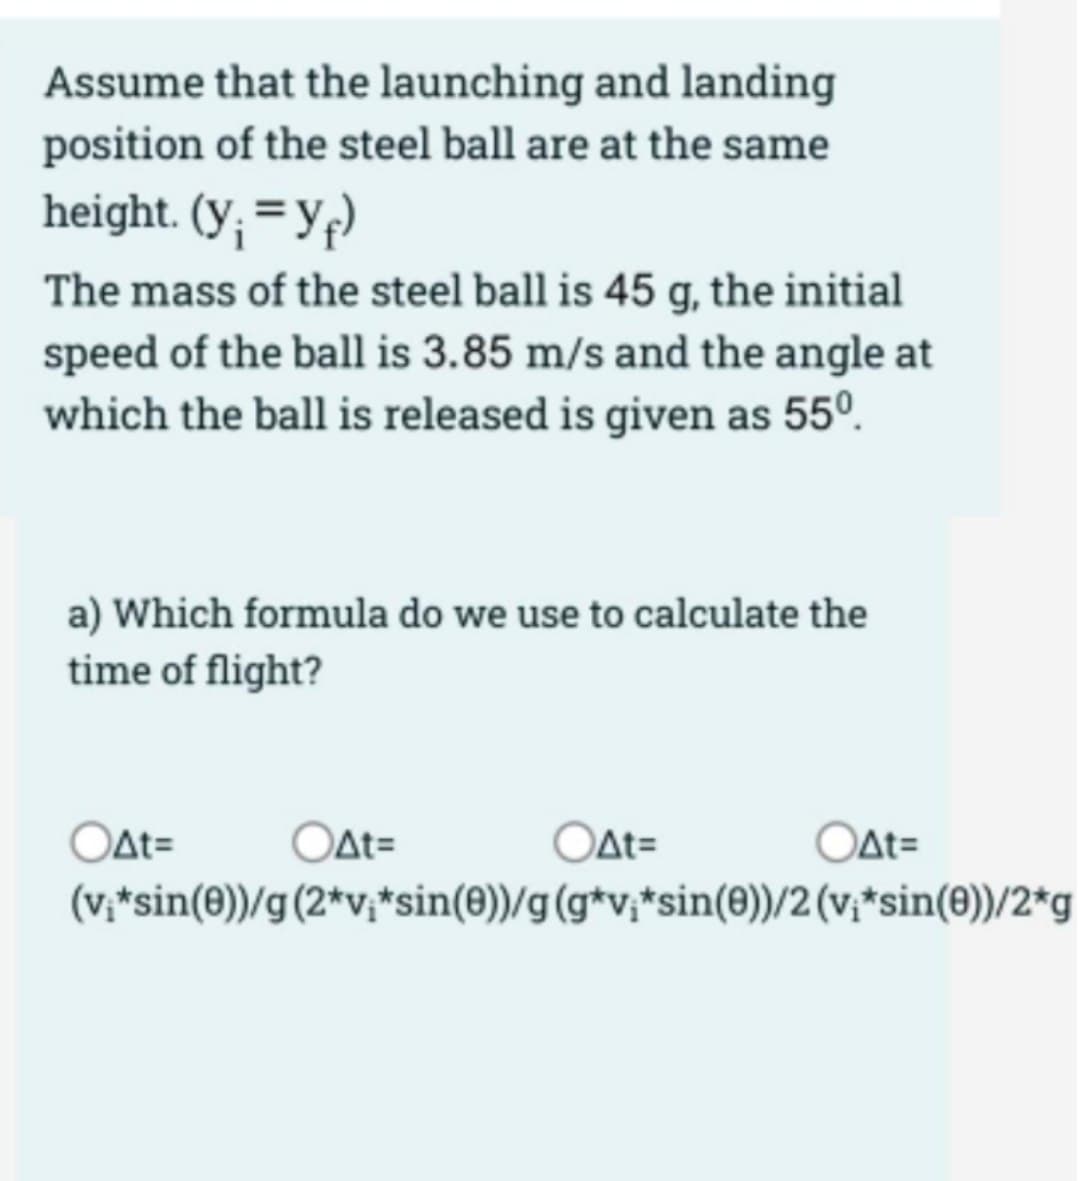 Assume that the launching and landing
position of the steel ball are at the same
height. (y; = Yf)
The mass of the steel ball is 45 g, the initial
speed of the ball is 3.85 m/s and the angle at
which the ball is released is given as 55º.
a) Which formula do we use to calculate the
time of flight?
Oat=
OAt=
OAt=
OAt=
(v,*sin(0))/g(2*v;*sin(0))/g(g*v;*sin(e))/2 (v;*sin(e))/2*g
